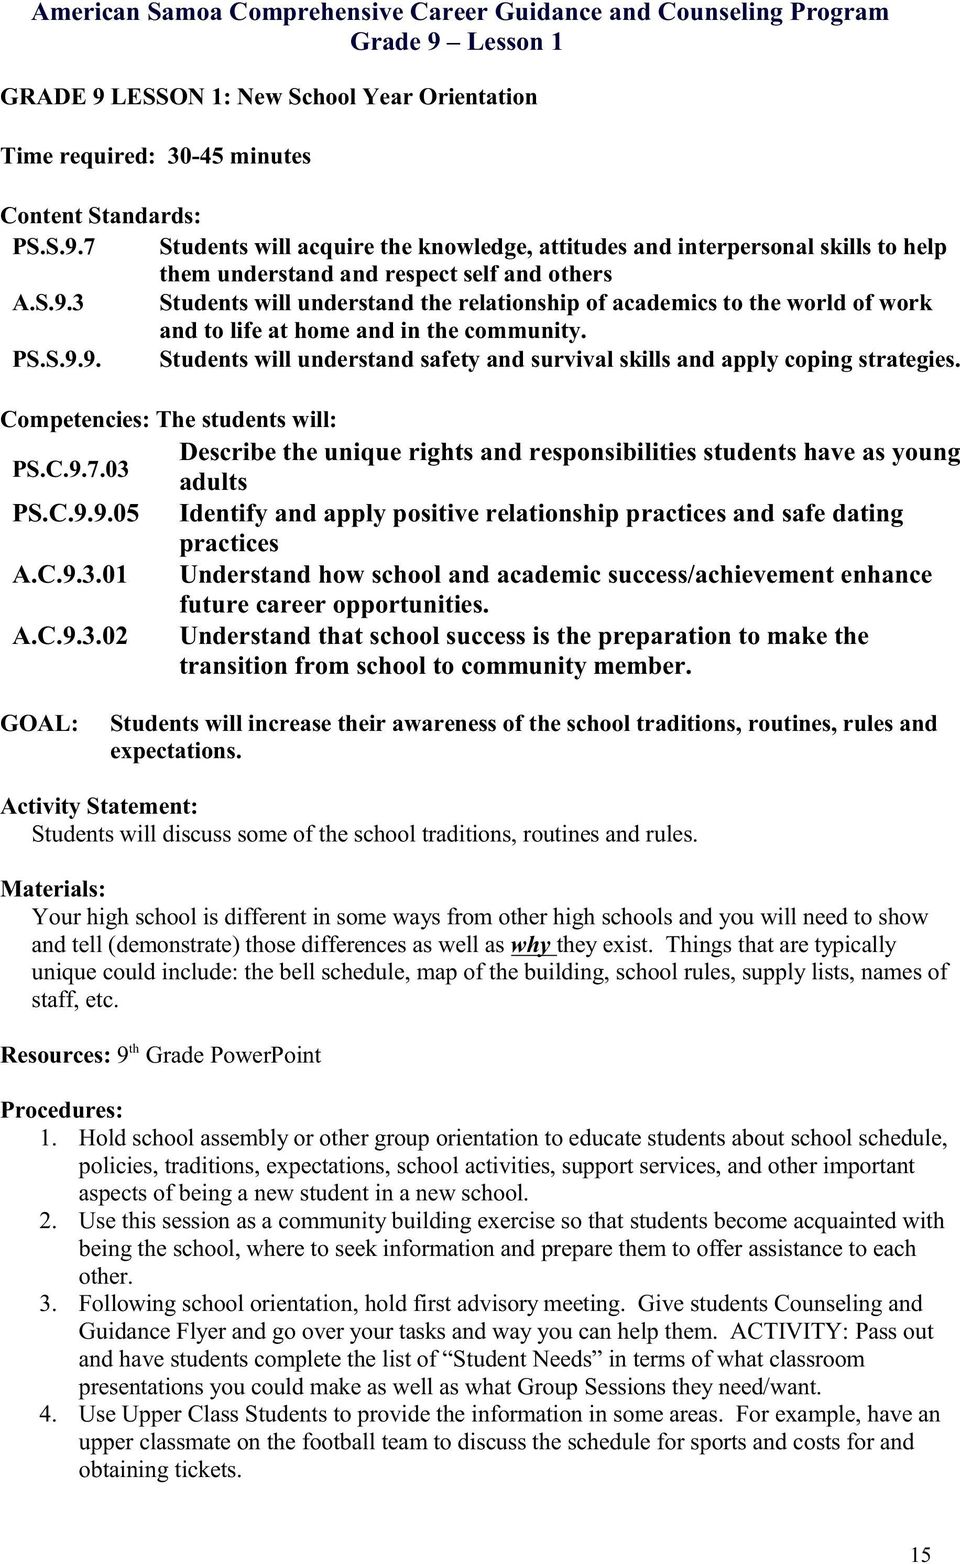 Competencies: The students will: Describe the unique rights and responsibilities students have as young PS.C.9.7.03 adults PS.C.9.9.05 Identify and apply positive relationship practices and safe dating practices A.